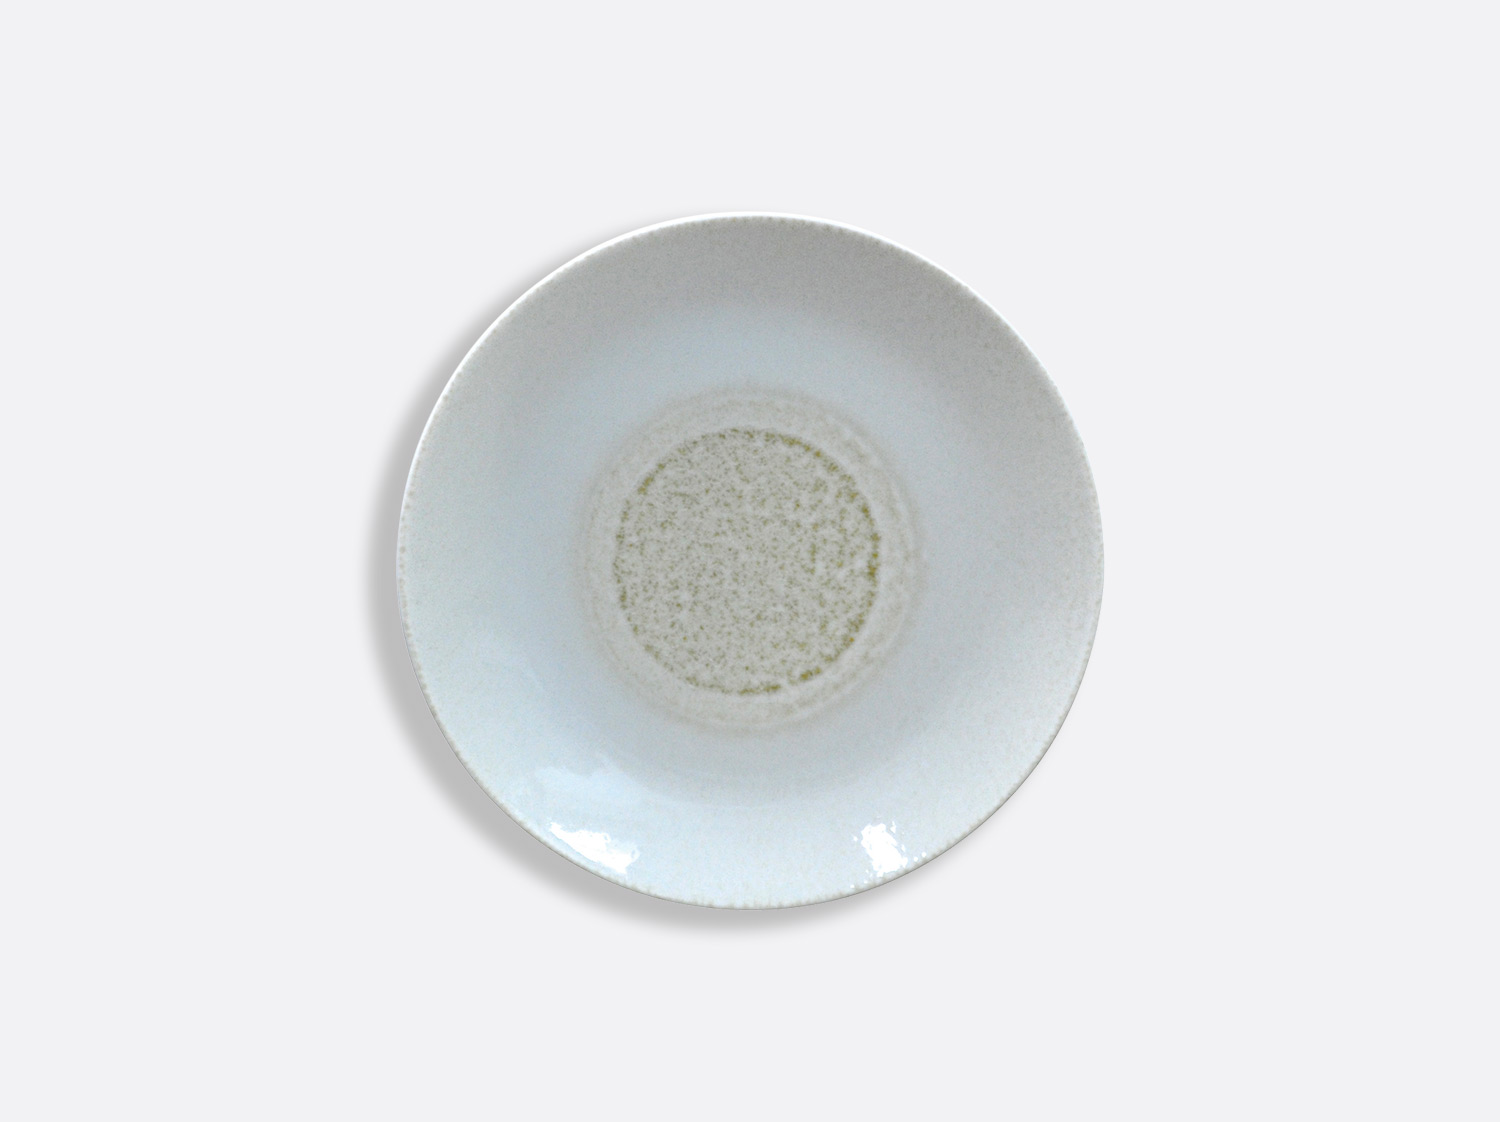 China Ivoire coupe plate 14 cm of the collection Iris Ivoire | Bernardaud